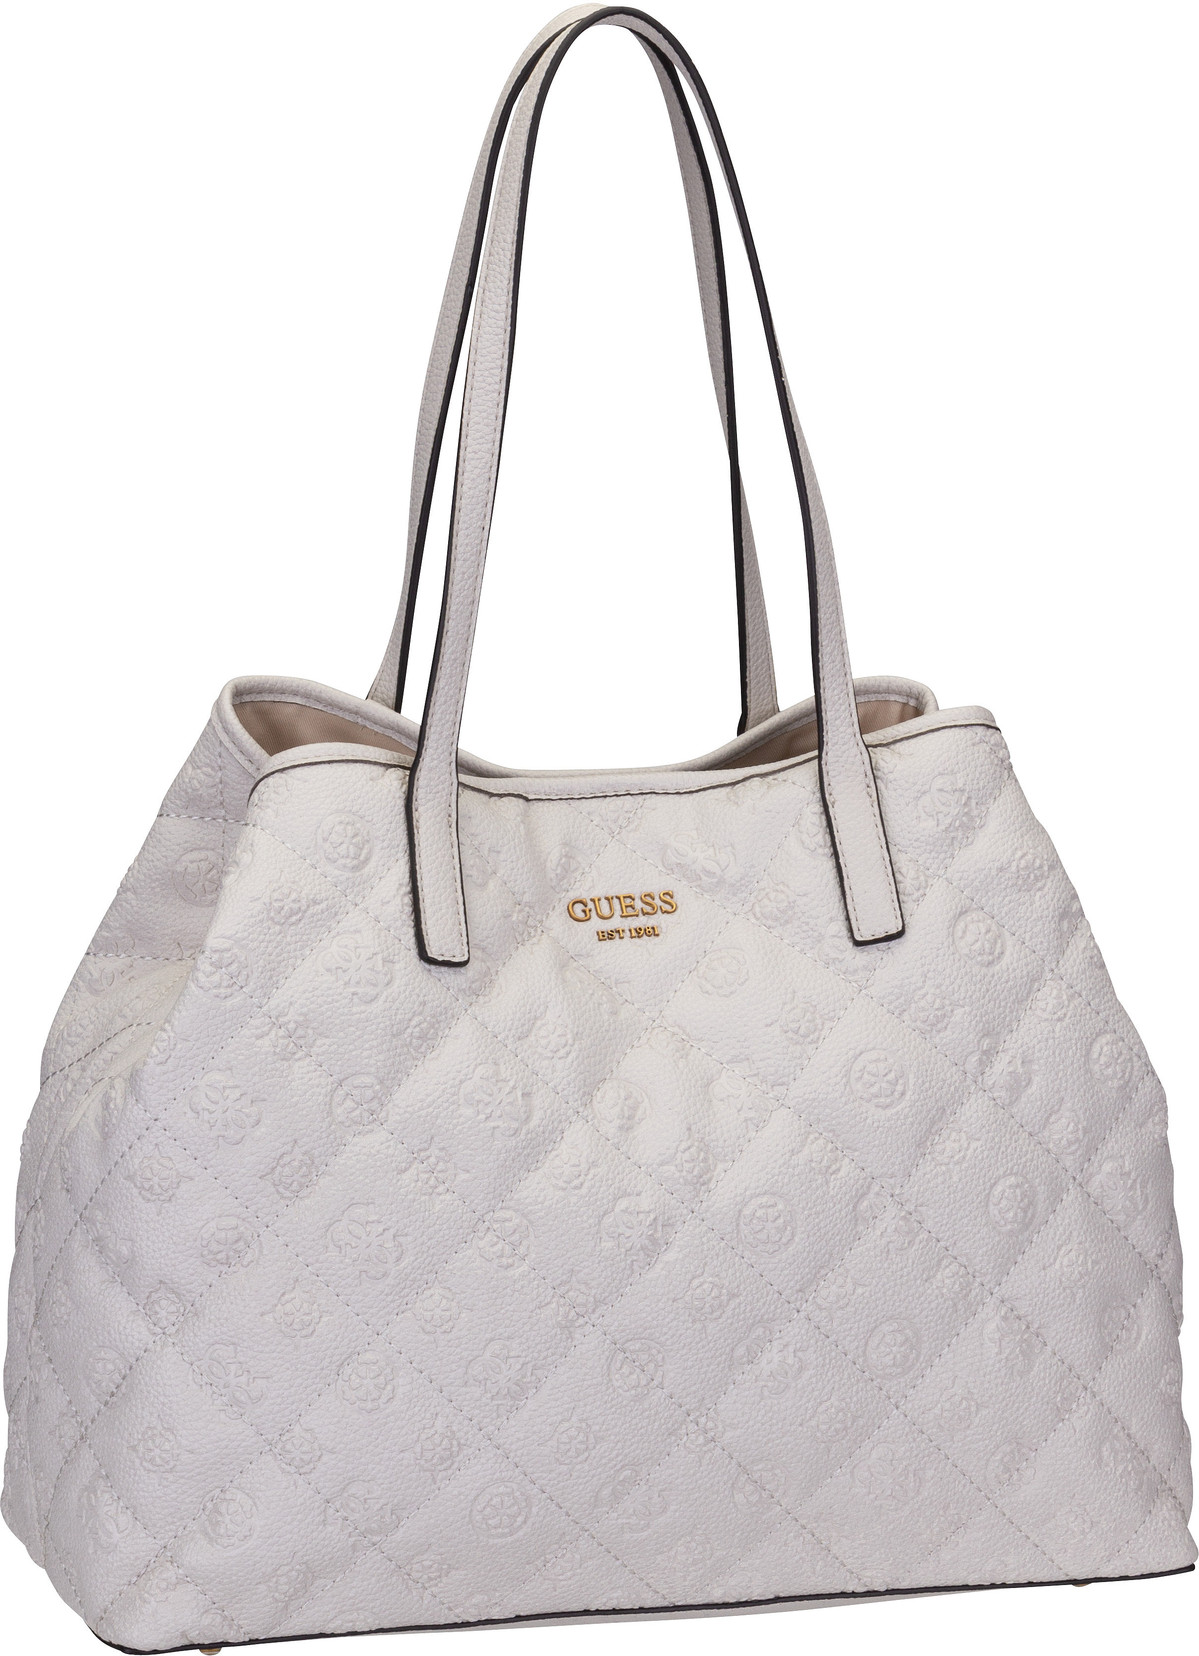 Guess Guess Vikky Large Tote Quilted in Beige (22.1 Liter), Shopper